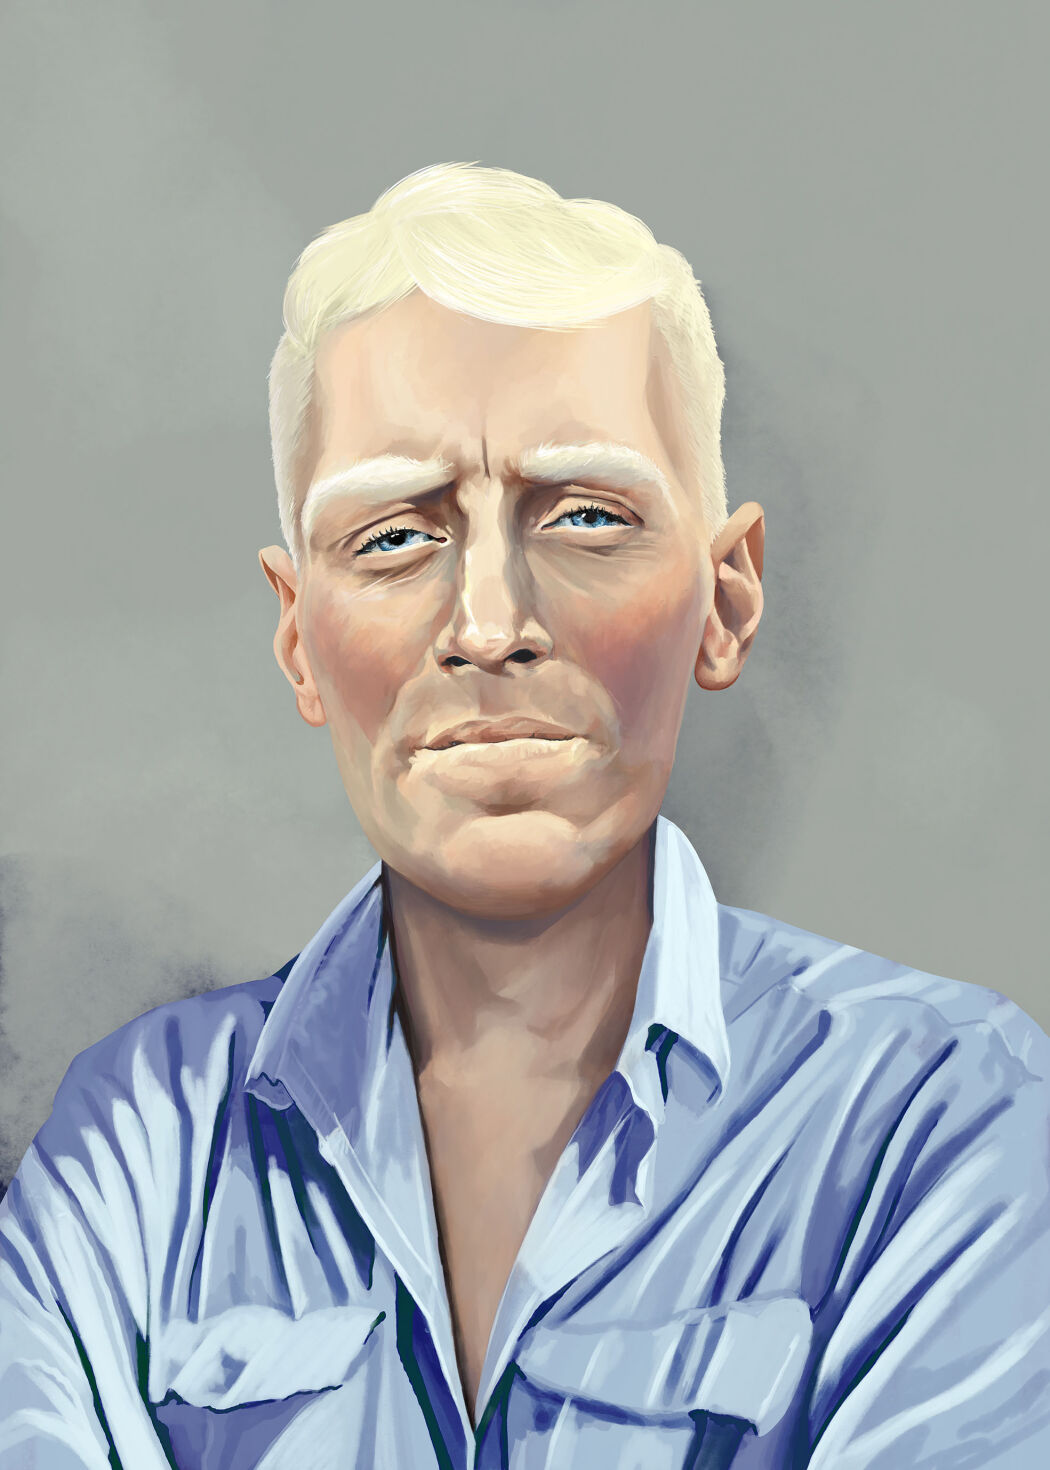 Illustrated photorealistic style portrait of Max von Sydow by Eplet